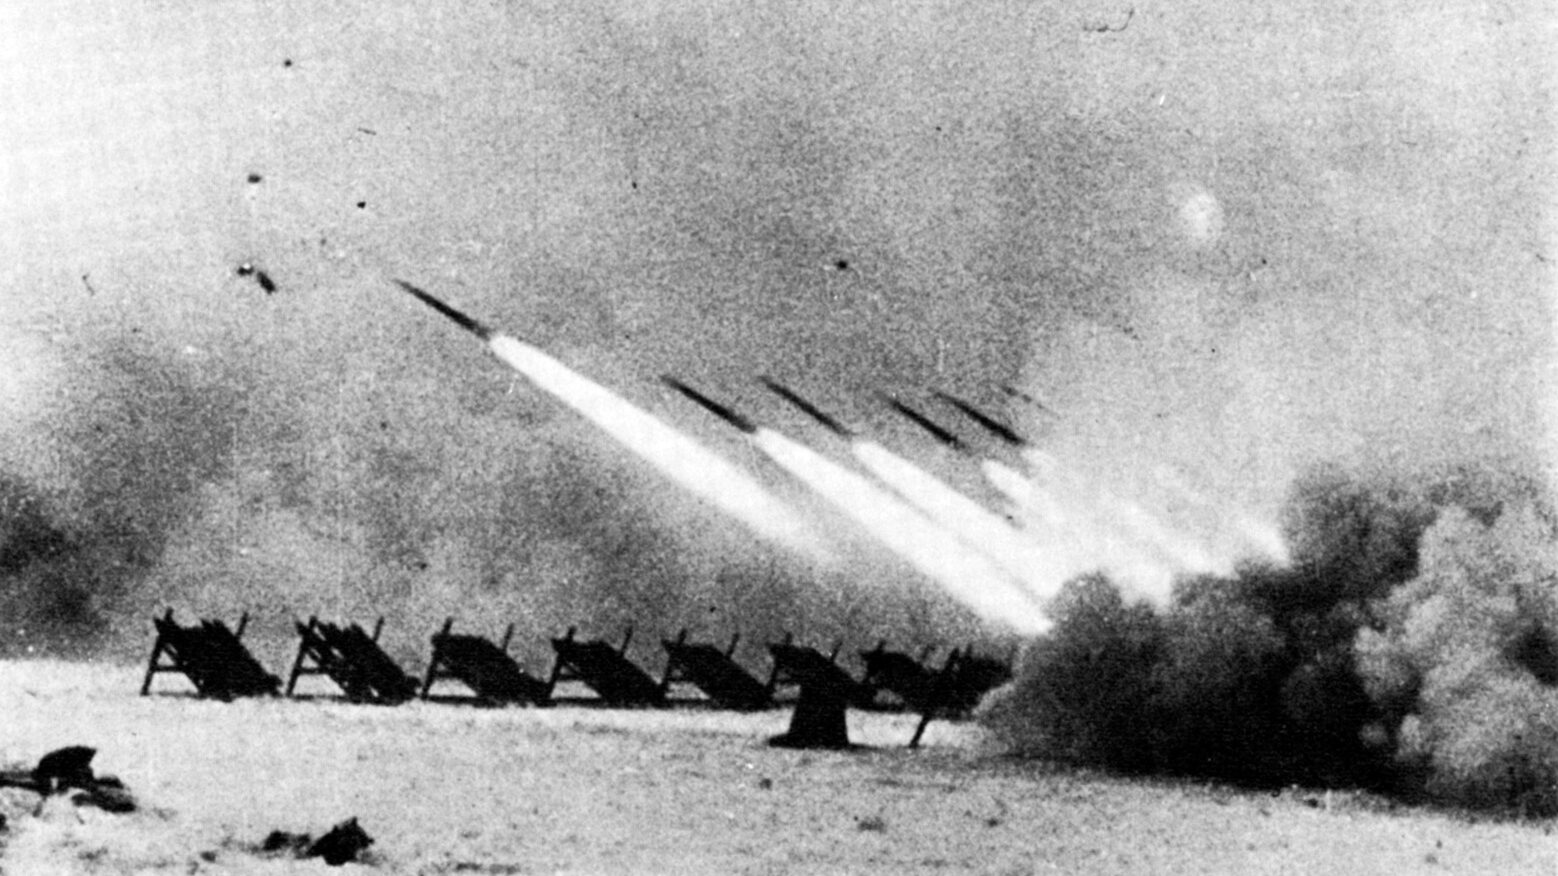 Soviet Katyusha rockets lift off in waves and speed toward their targets among the German defenses at Stalingrad. After months of relentless pounding, the Germans capitulated and over 300,000 prisoners were taken.